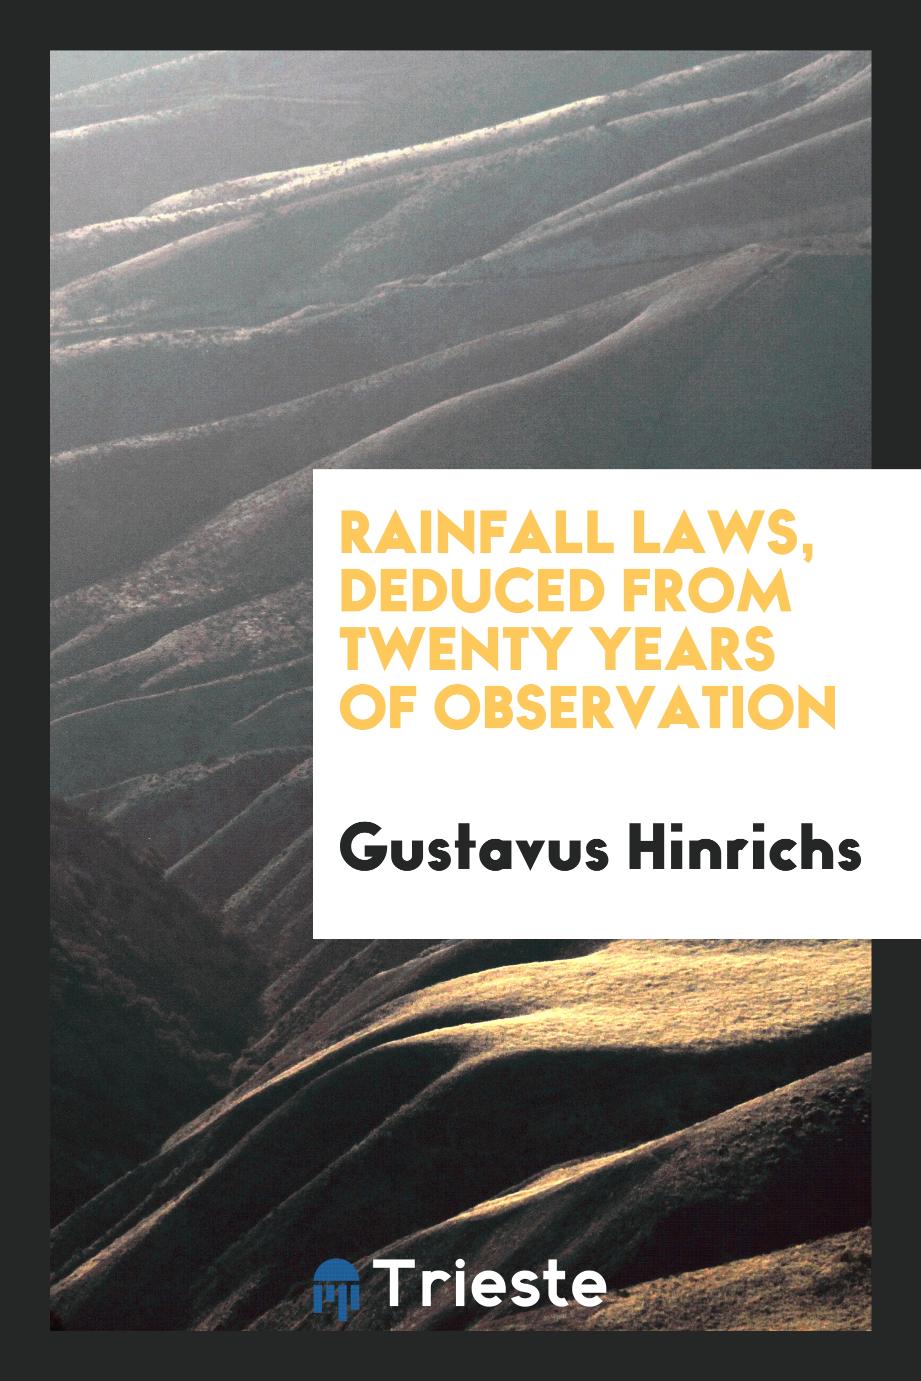 Rainfall Laws, Deduced from Twenty Years of Observation